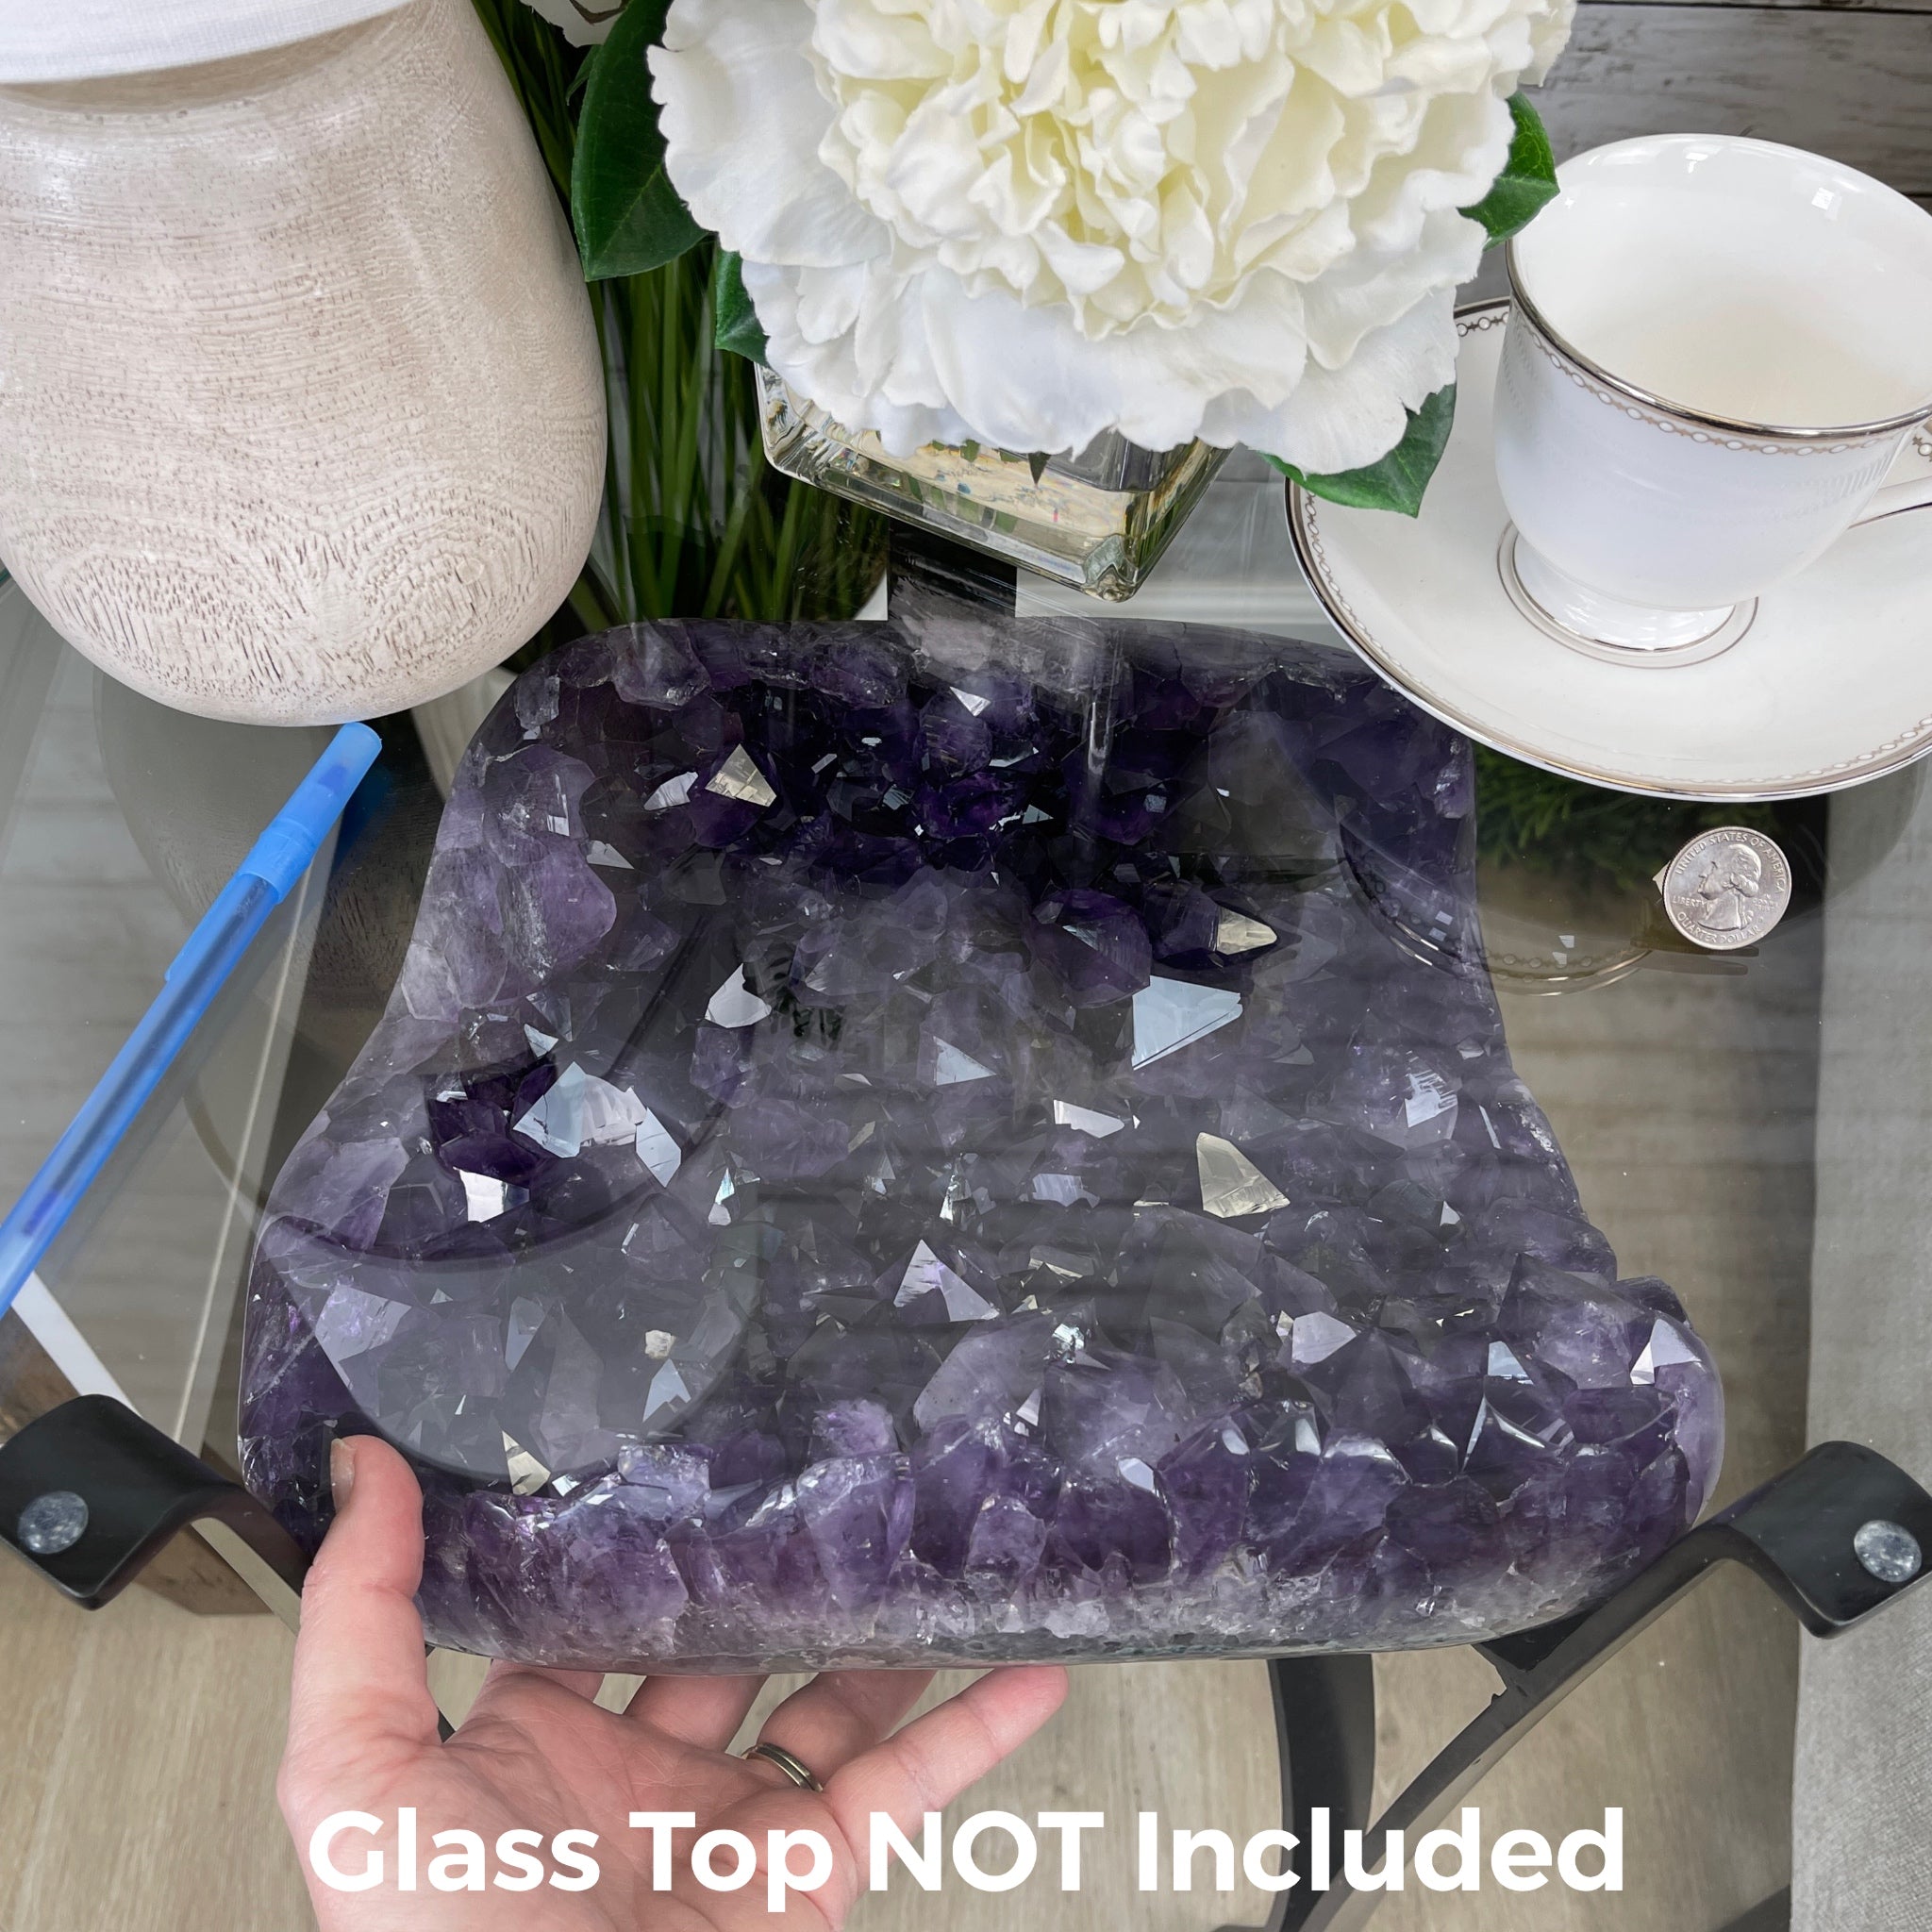 Super Quality Brazilian Amethyst Geode Side Table, 38.6 lbs, 23.75" tall on a metal base #1384-0028 by Brazil Gems - Brazil GemsBrazil GemsSuper Quality Brazilian Amethyst Geode Side Table, 38.6 lbs, 23.75" tall on a metal base #1384-0028 by Brazil GemsTables: Side1384-0028